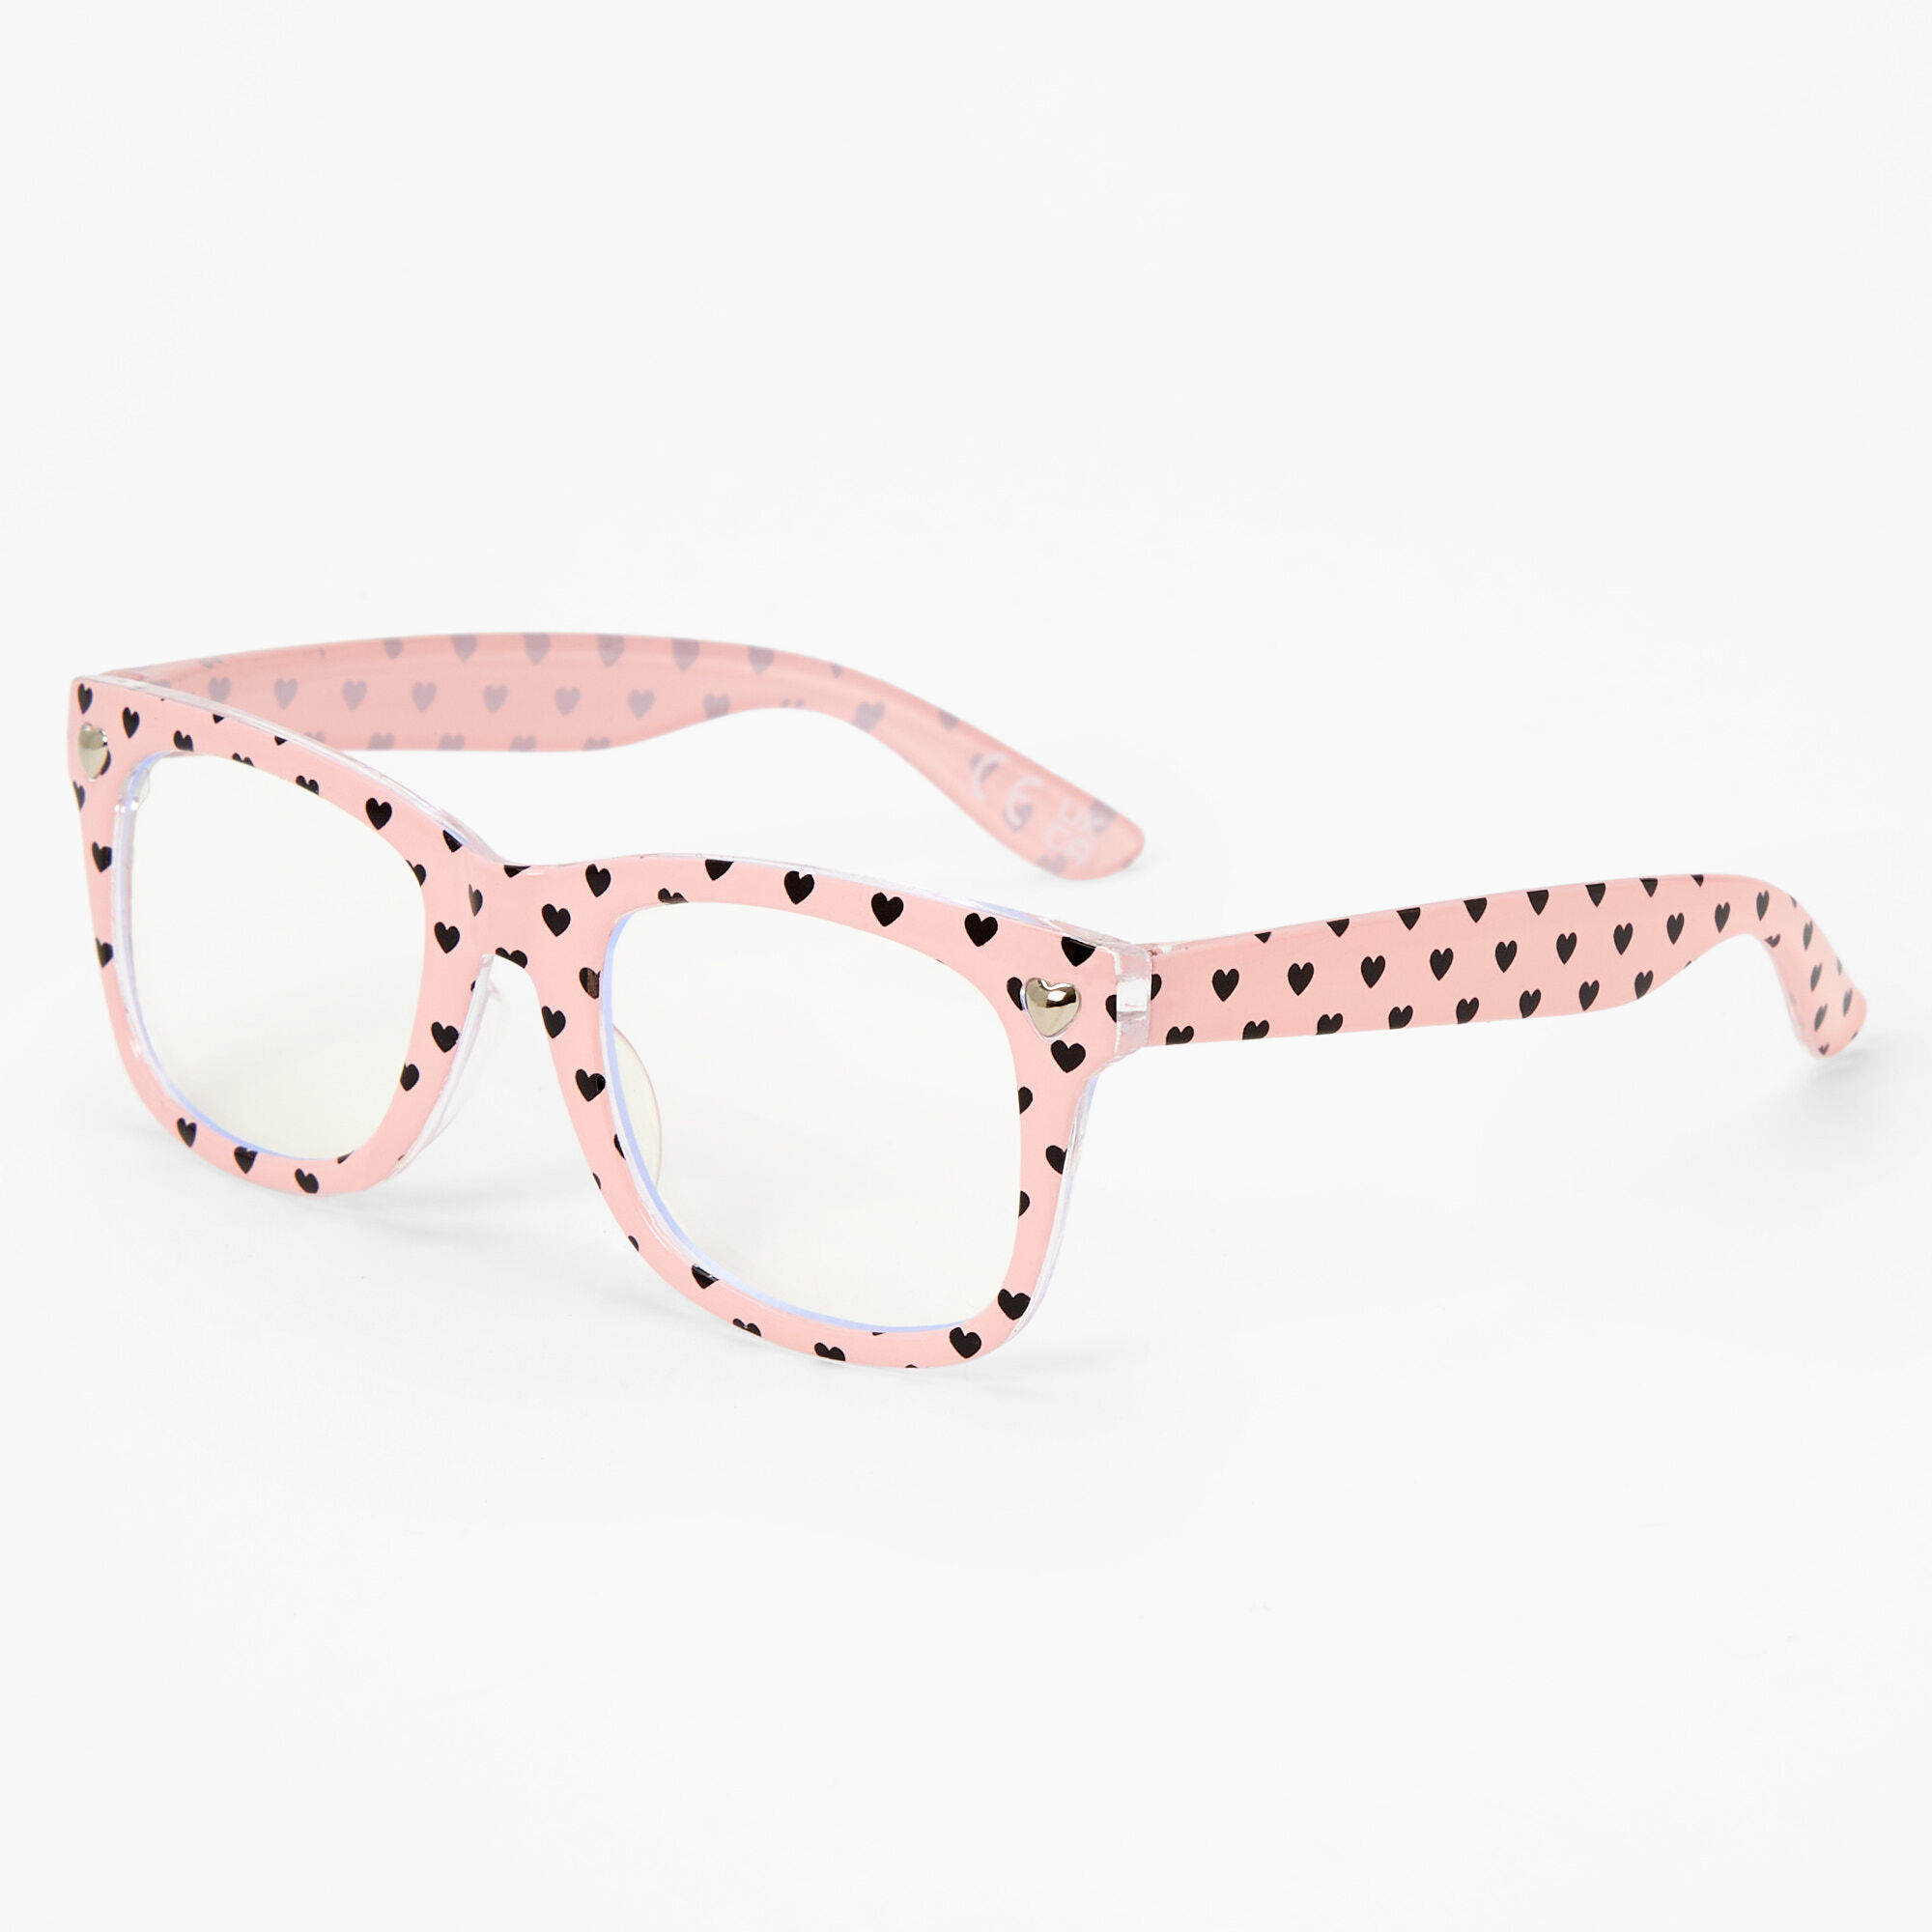 View Claires Club Edgy Hearts Clear Lens Frames Pink information